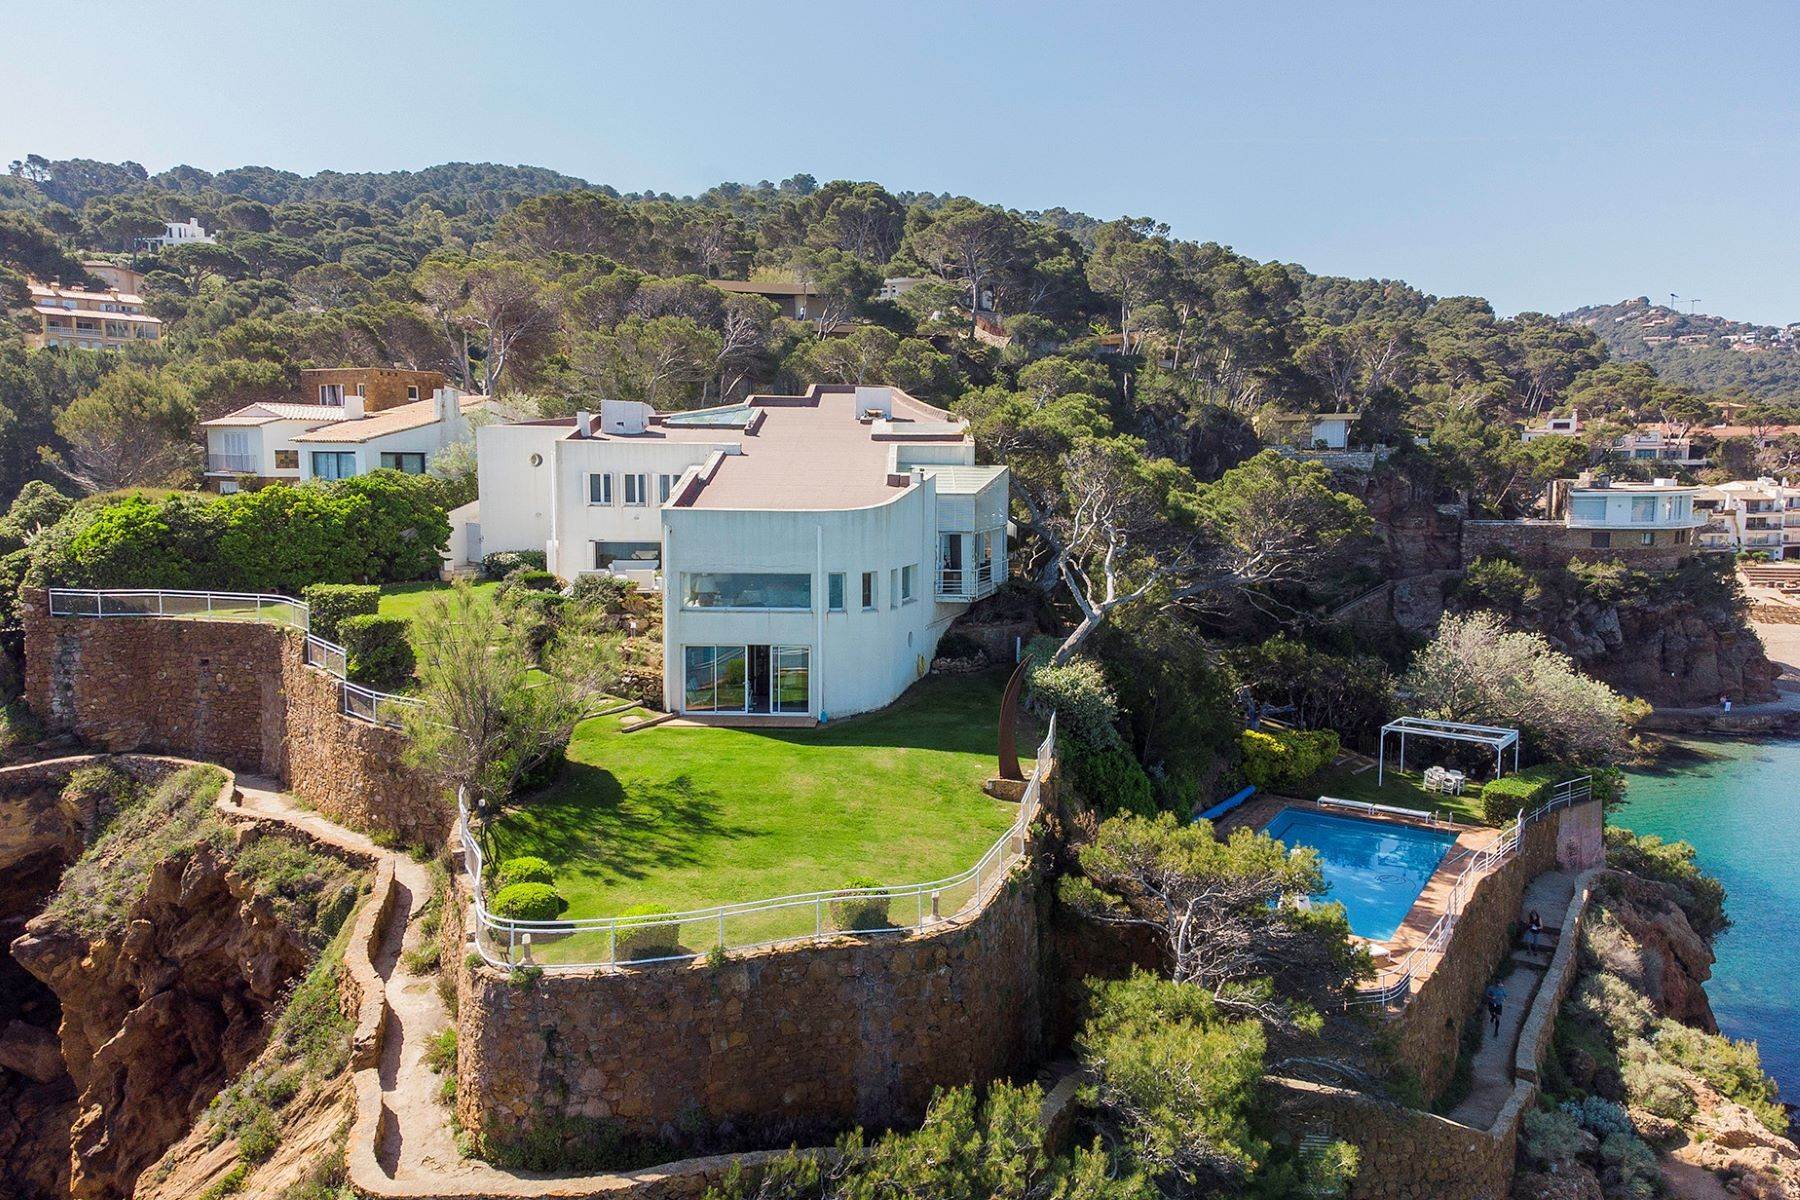 Single Family Homes for Sale at Unique house in 70s architecture on the seafront Begur, Costa Brava 17255 Spain